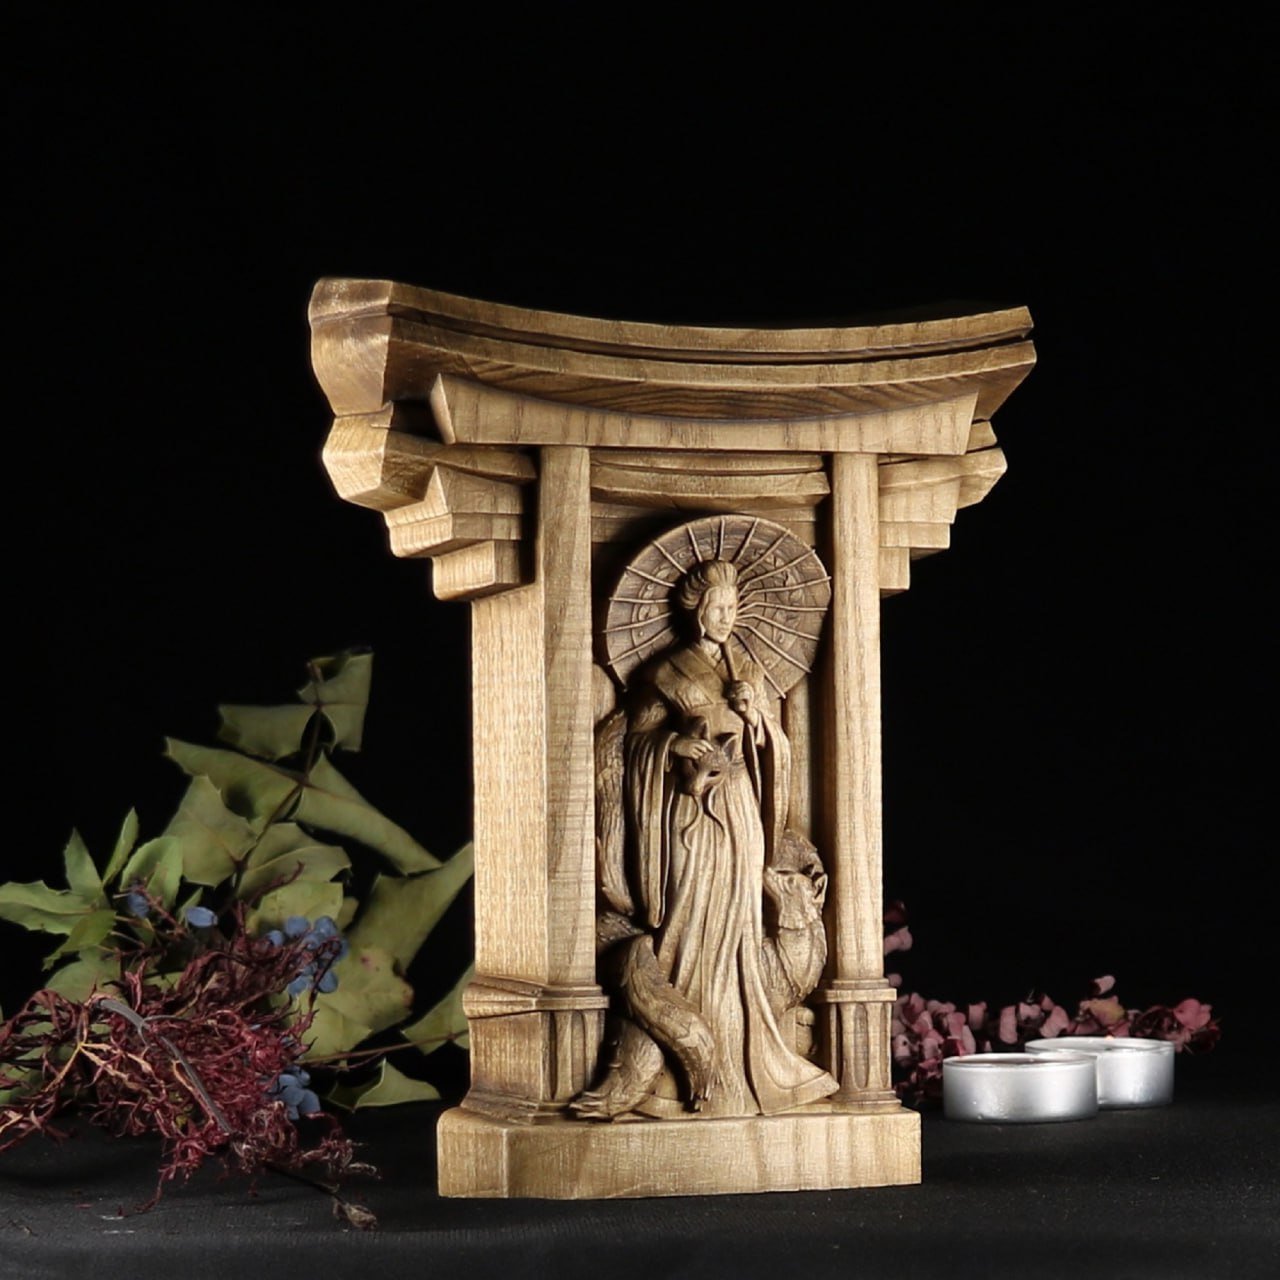 Inari Okami: A Timeless Wooden Statue Embodying Japanese Mythology and Culture